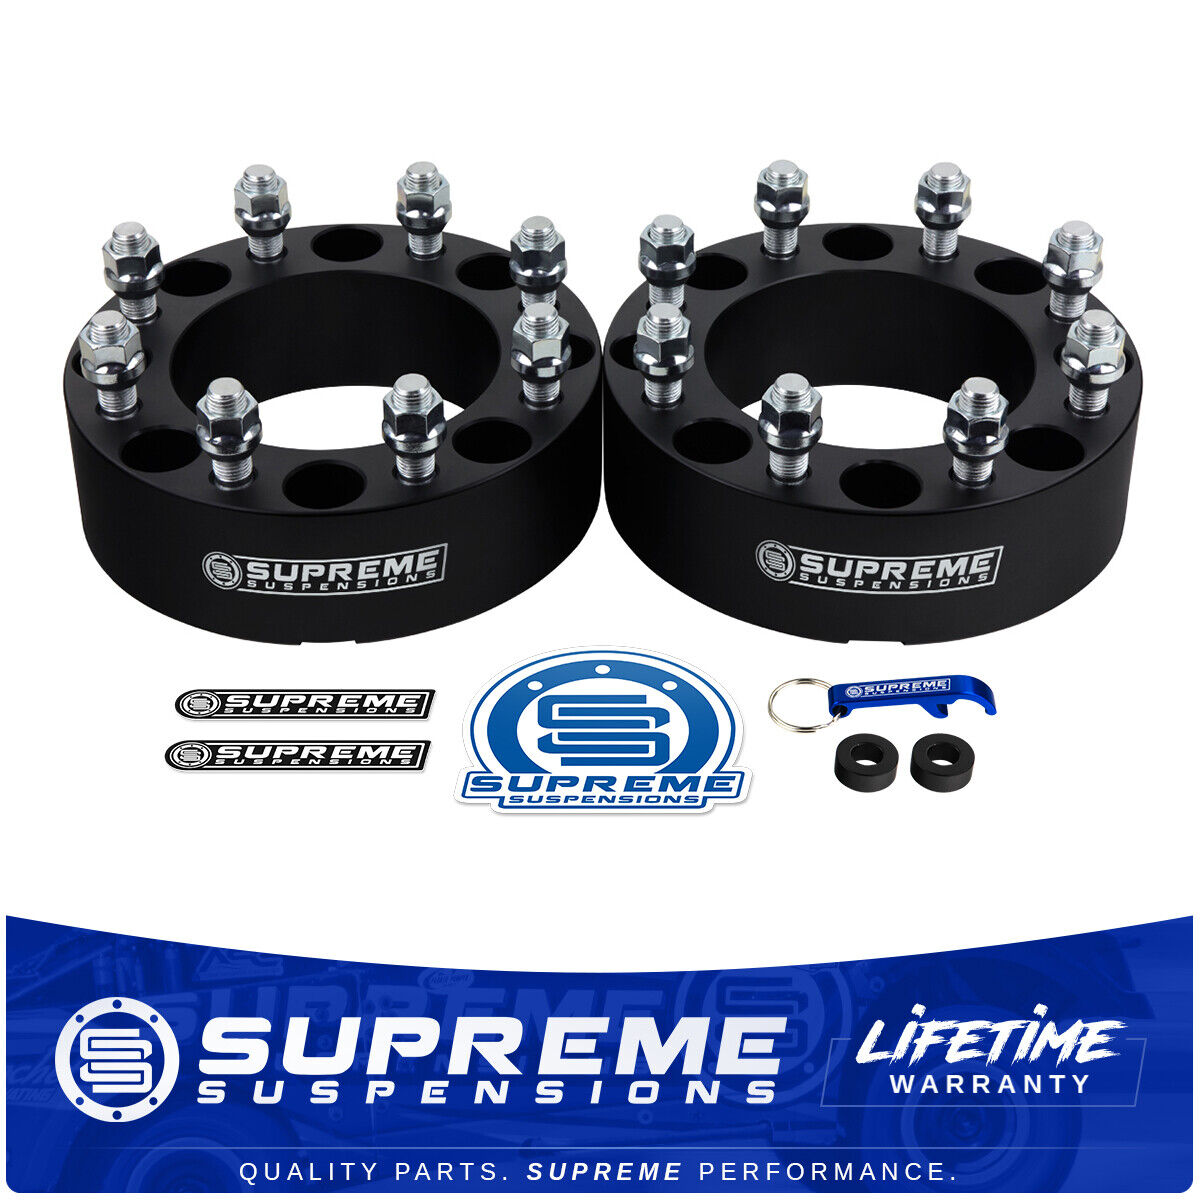 Wheel Spacers For Ford F-250 F-350 Super Duty Excursion - 8x170mm BP / M14x1.5